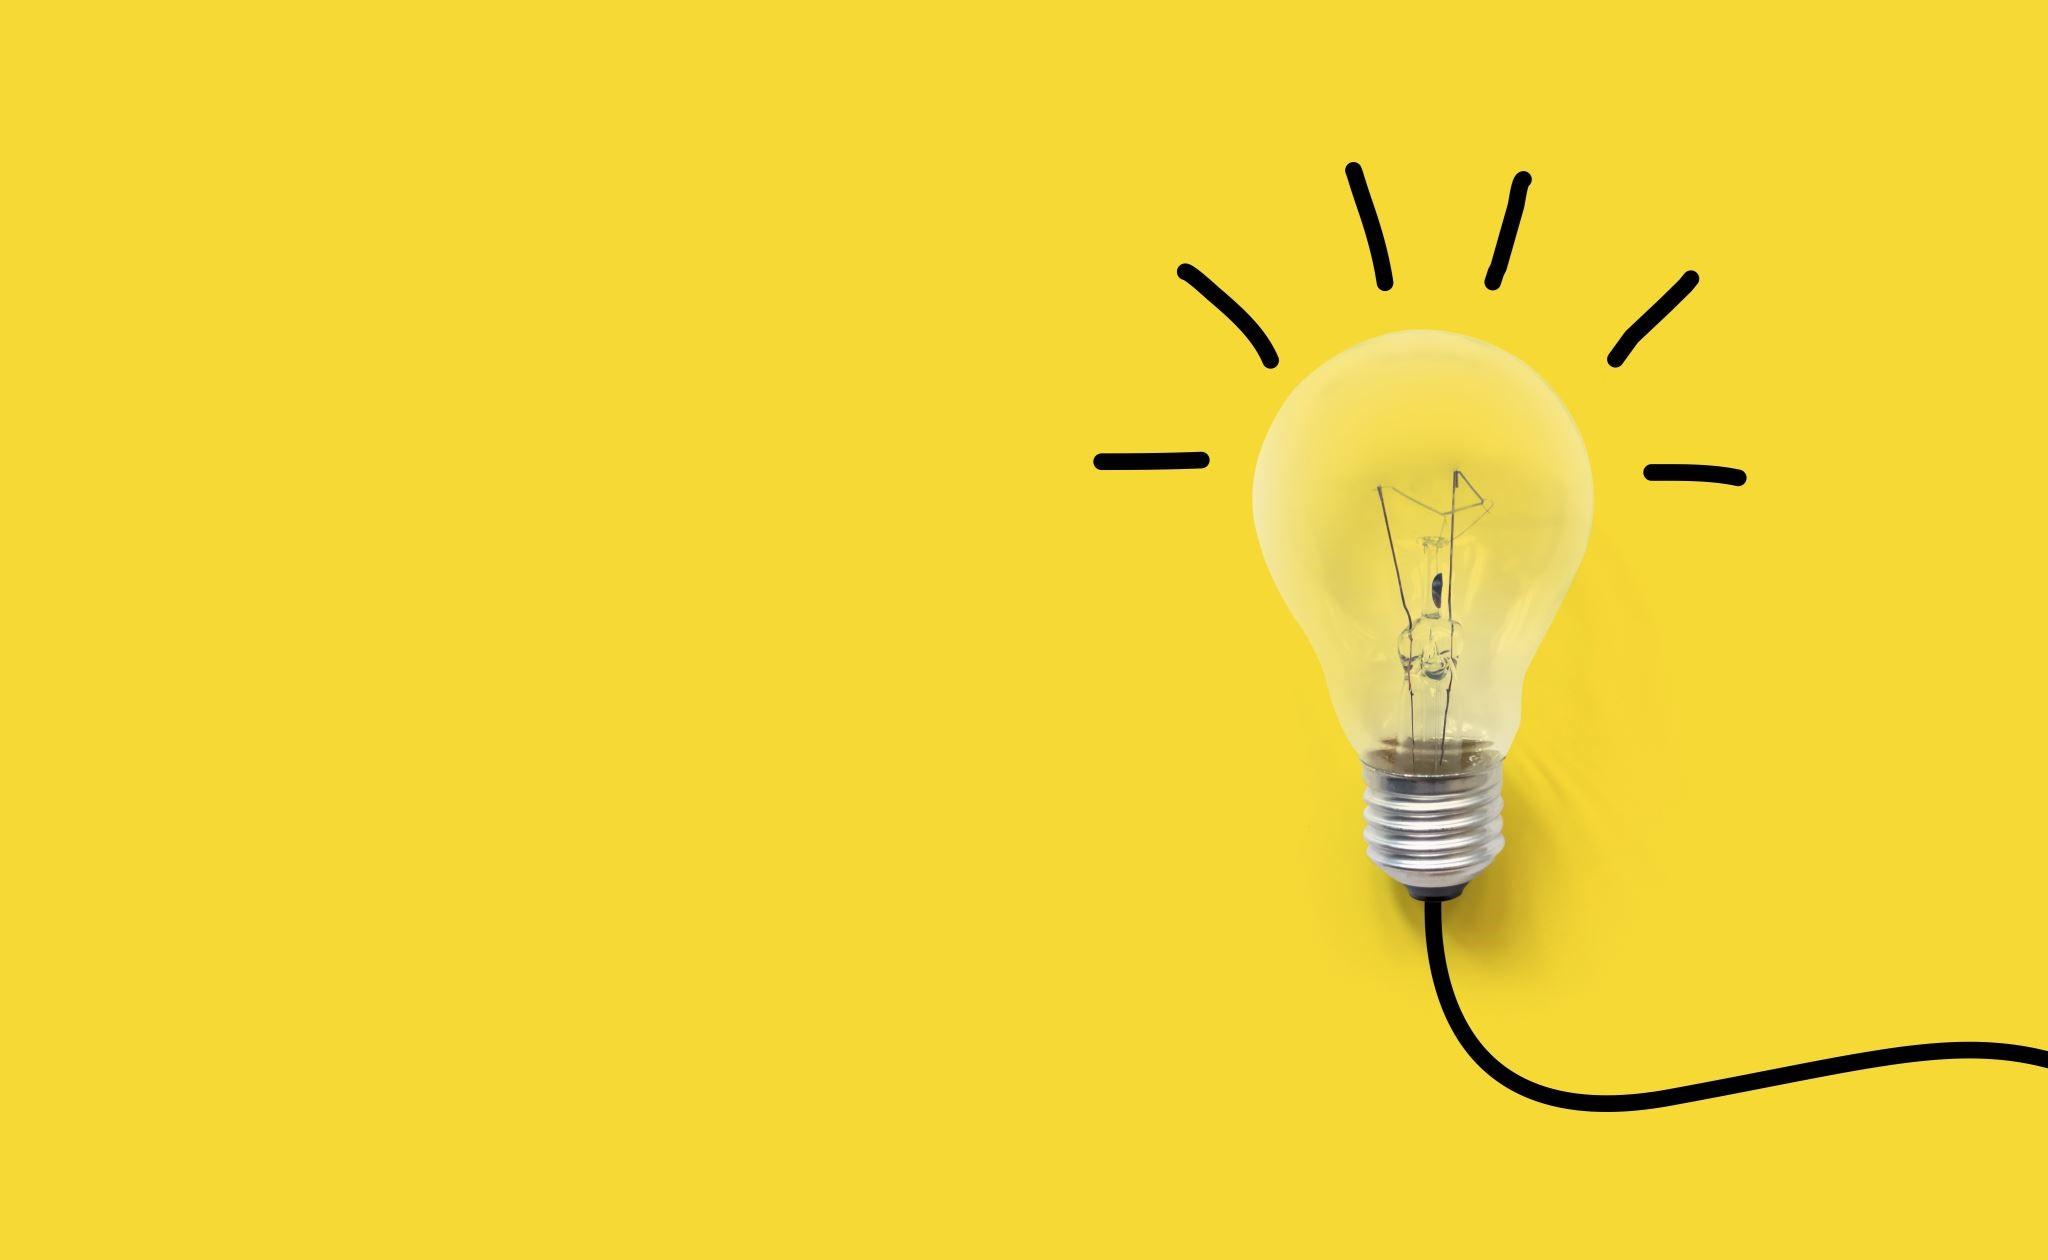 A light-bulb on a bright yellow background